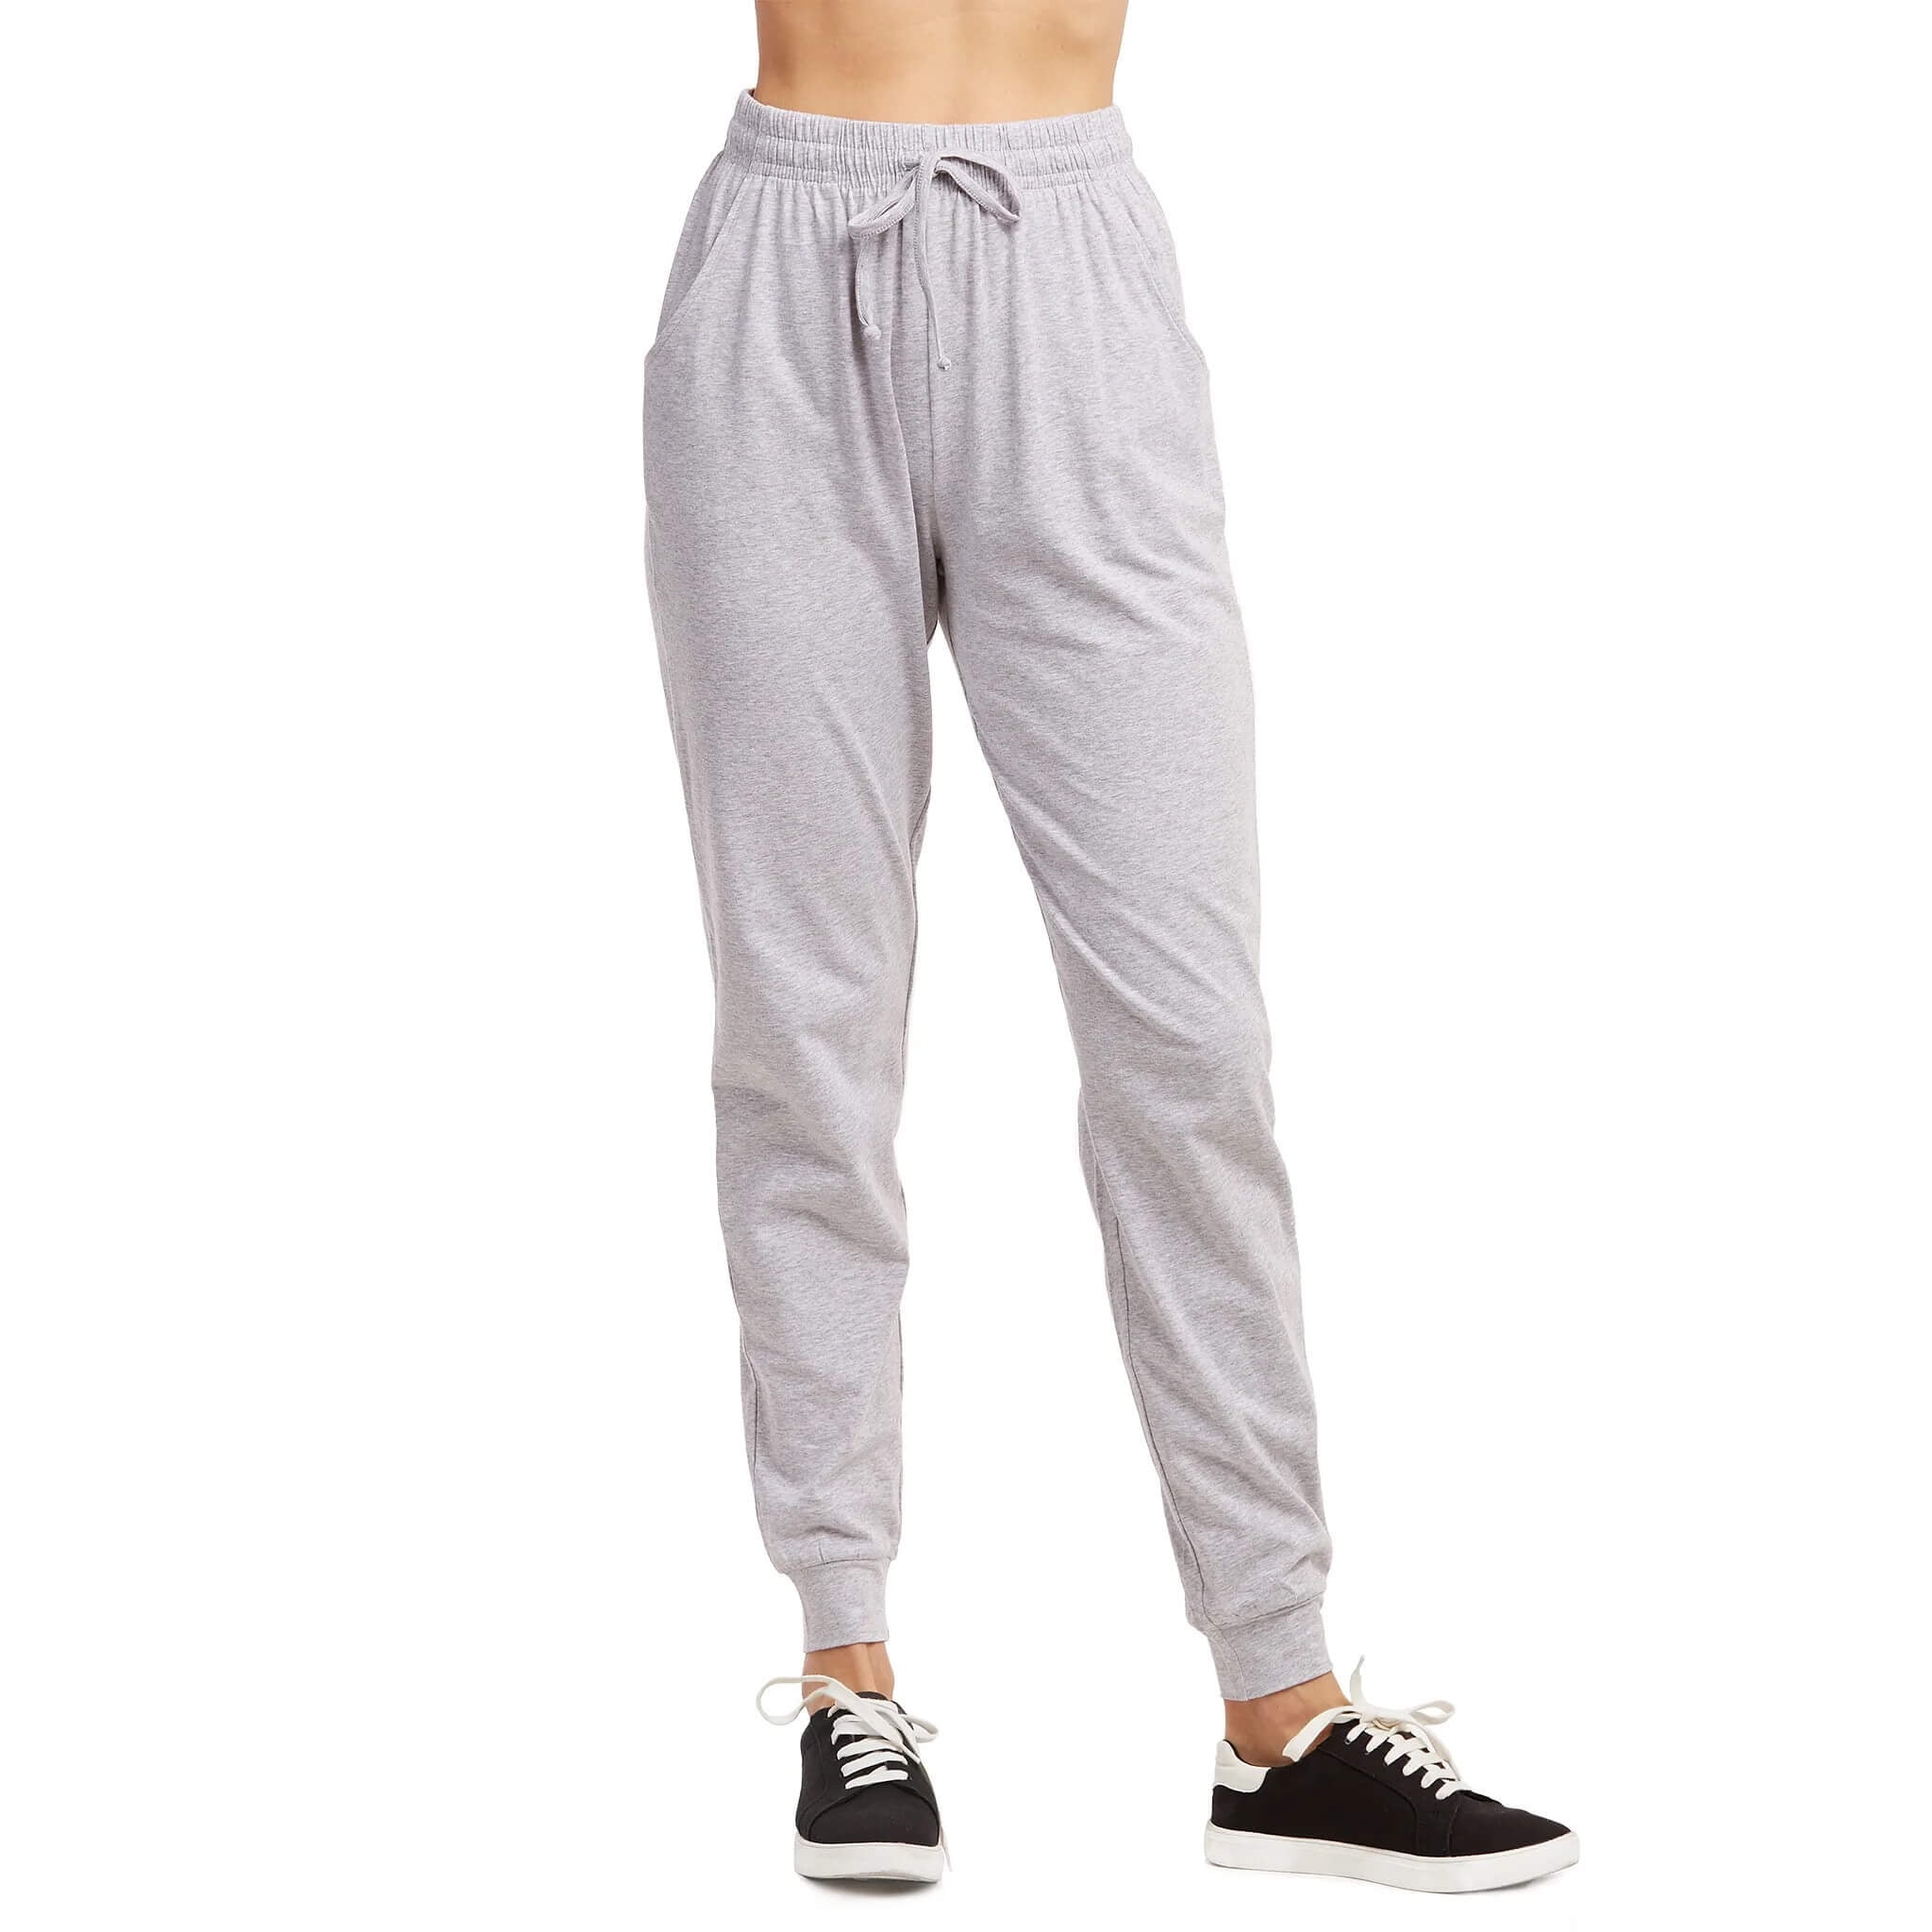 Women's Cotton Stretch Active Jersey Jogger Pants with Pockets, Heather  Grey S, 1 Pack